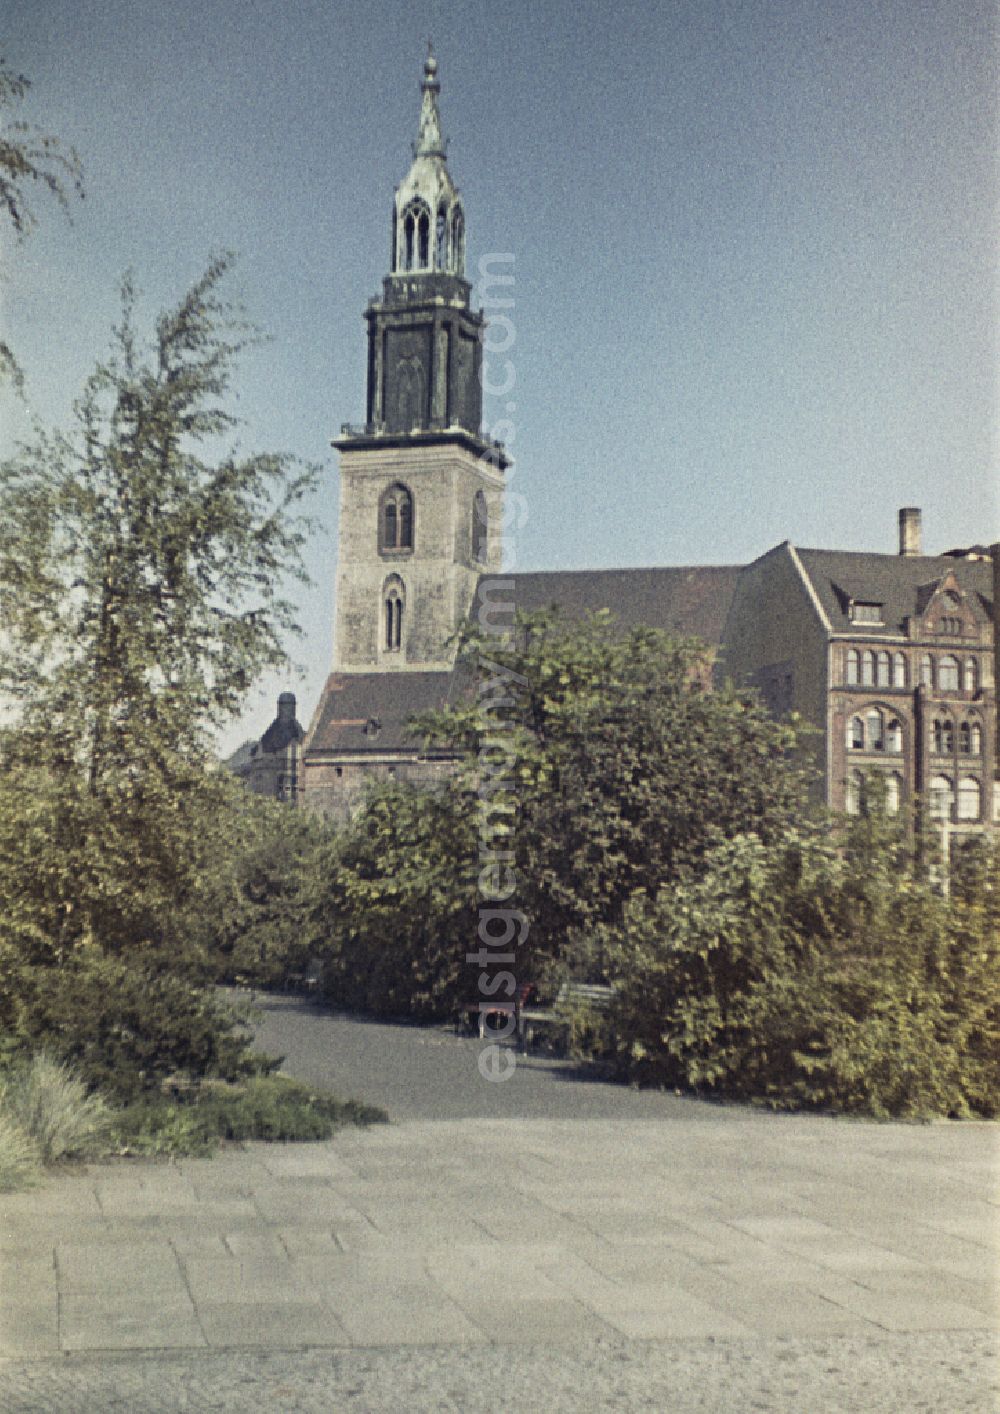 GDR image archive: Berlin - Bell tower of the sacred building of the church St. Marienkirche on street Karl-Liebknecht-Strasse in the district Mitte in Berlin Eastberlin on the territory of the former GDR, German Democratic Republic